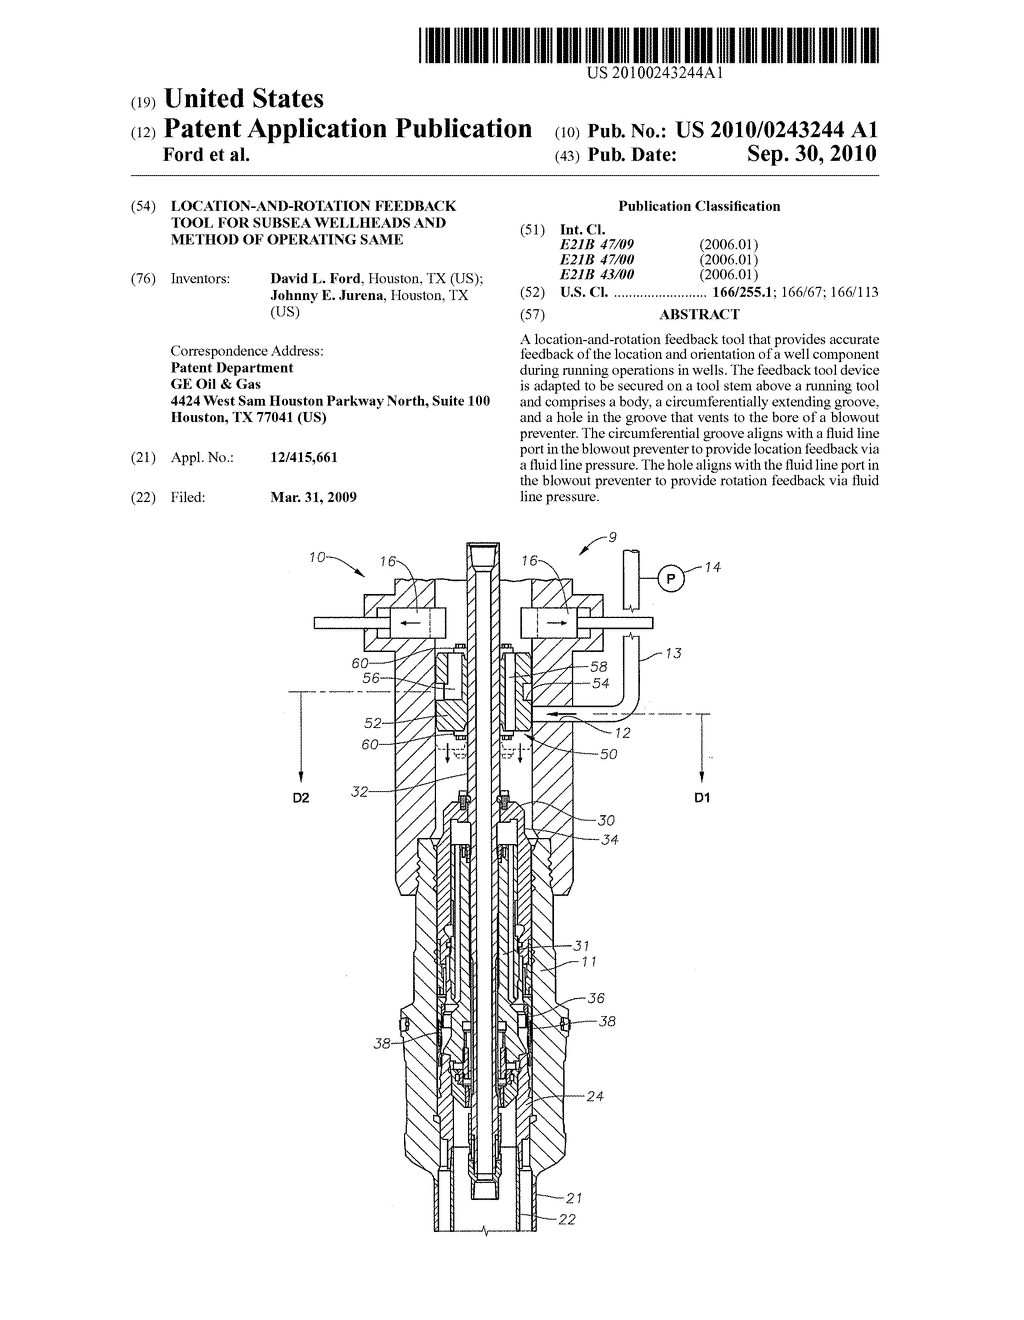 LOCATION-AND-ROTATION FEEDBACK TOOL FOR SUBSEA WELLHEADS AND METHOD OF OPERATING SAME - diagram, schematic, and image 01